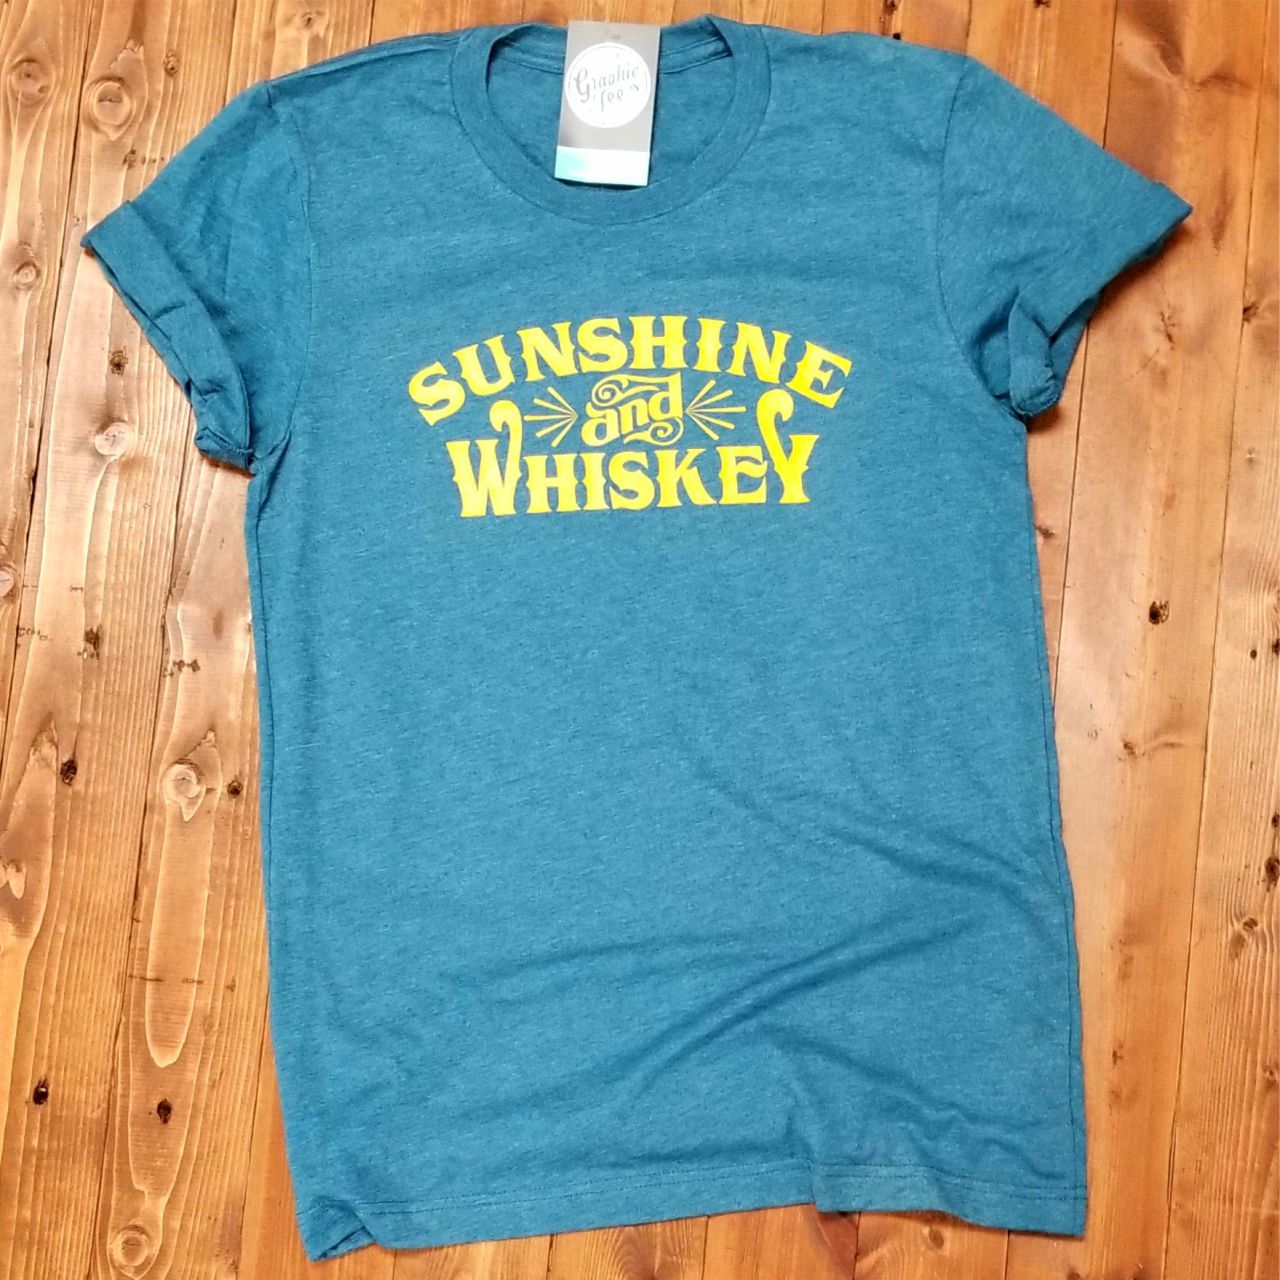 Sunshine and Whiskey - Unisex Tee - The Graphic Tee